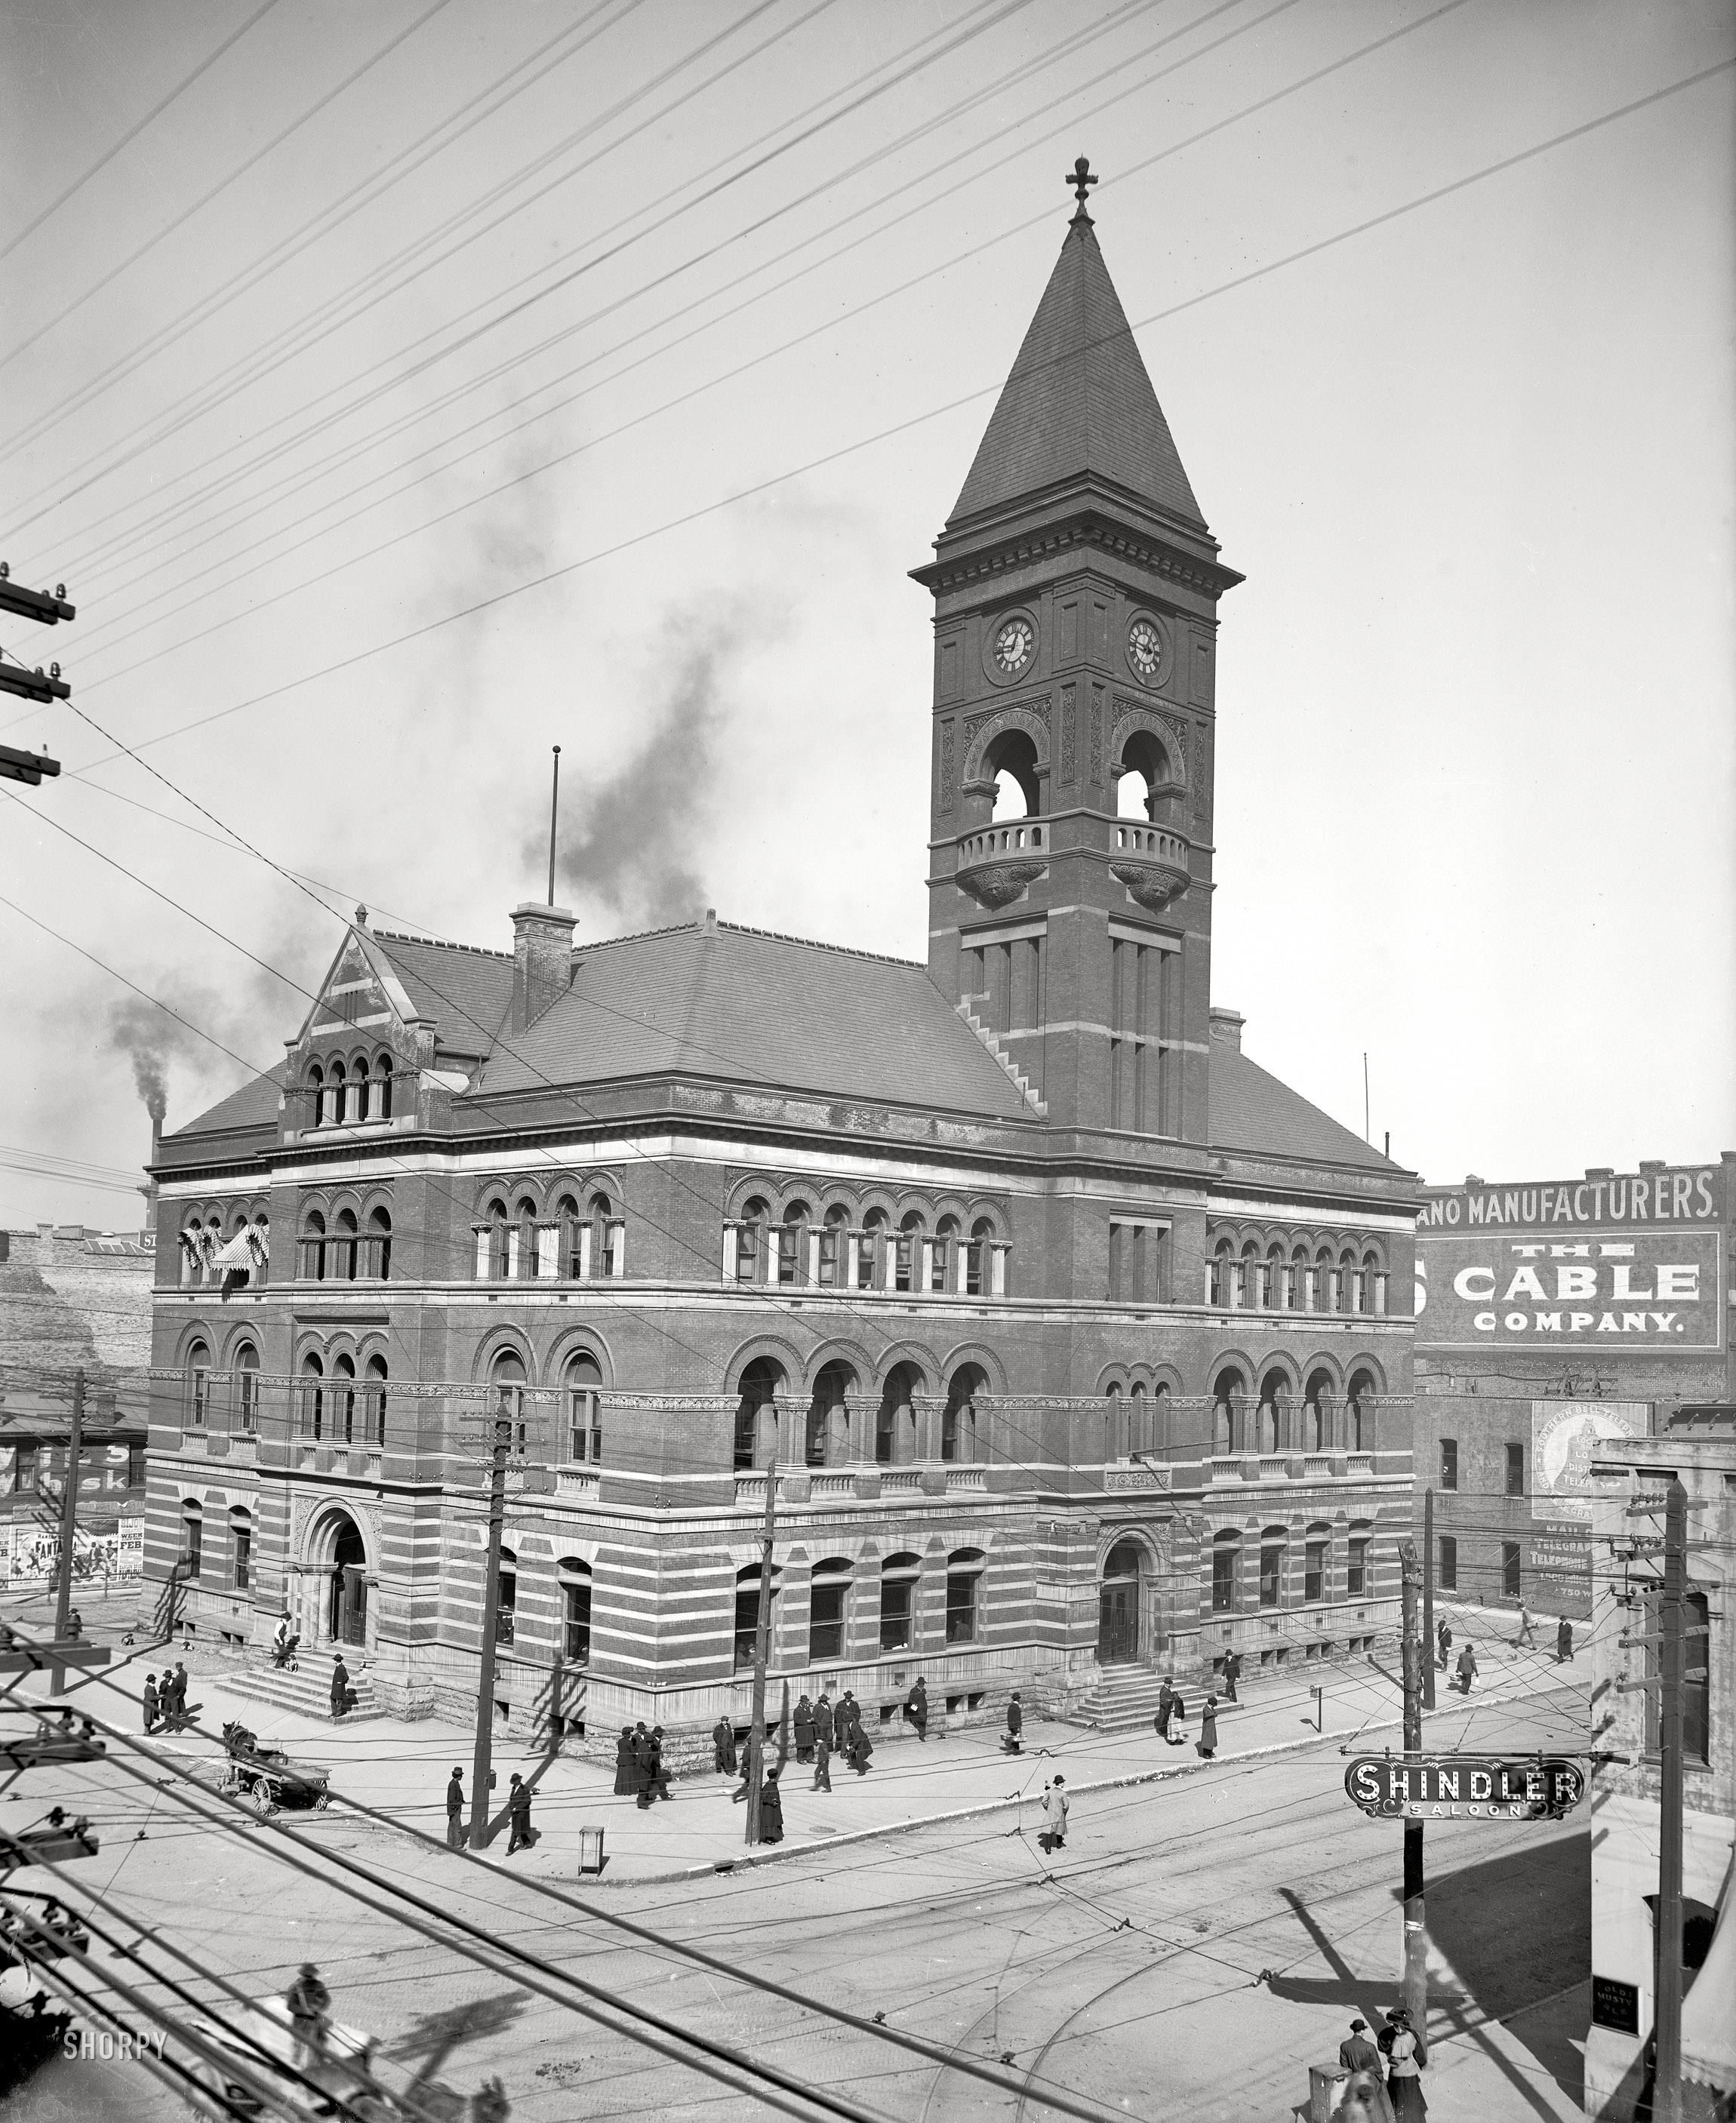 Birmingham, Alabama, circa 1906. "Birmingham Post Office." Right next to The Cable Company. 8x10 inch glass negative, Detroit Publishing Co. View full size.